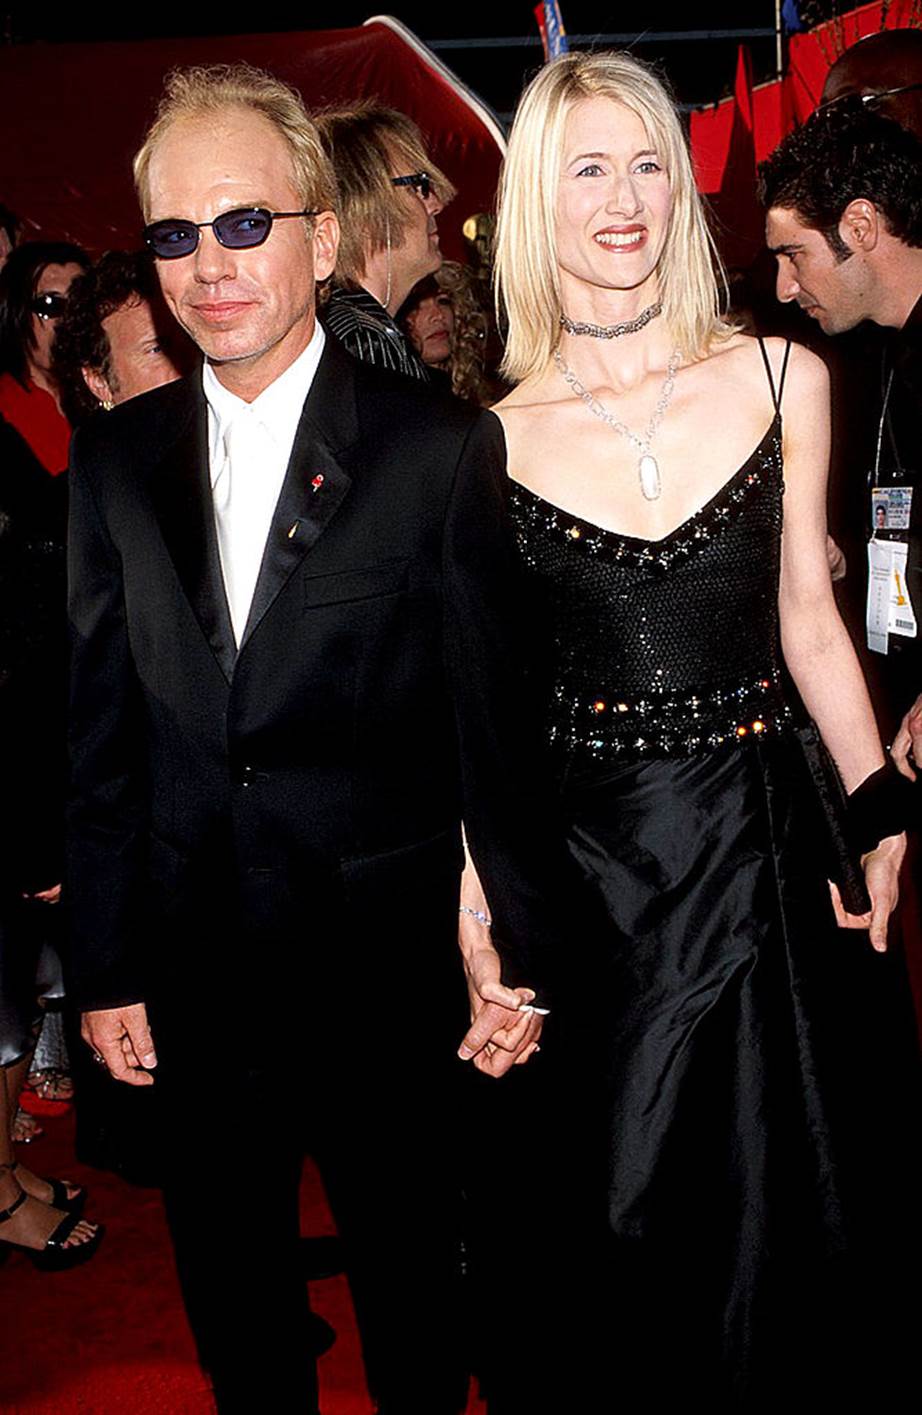 Billy Bob Thornton and Laura Dern, who were reportedly in a celebrity affair love-triangle with Jolie in the 90s